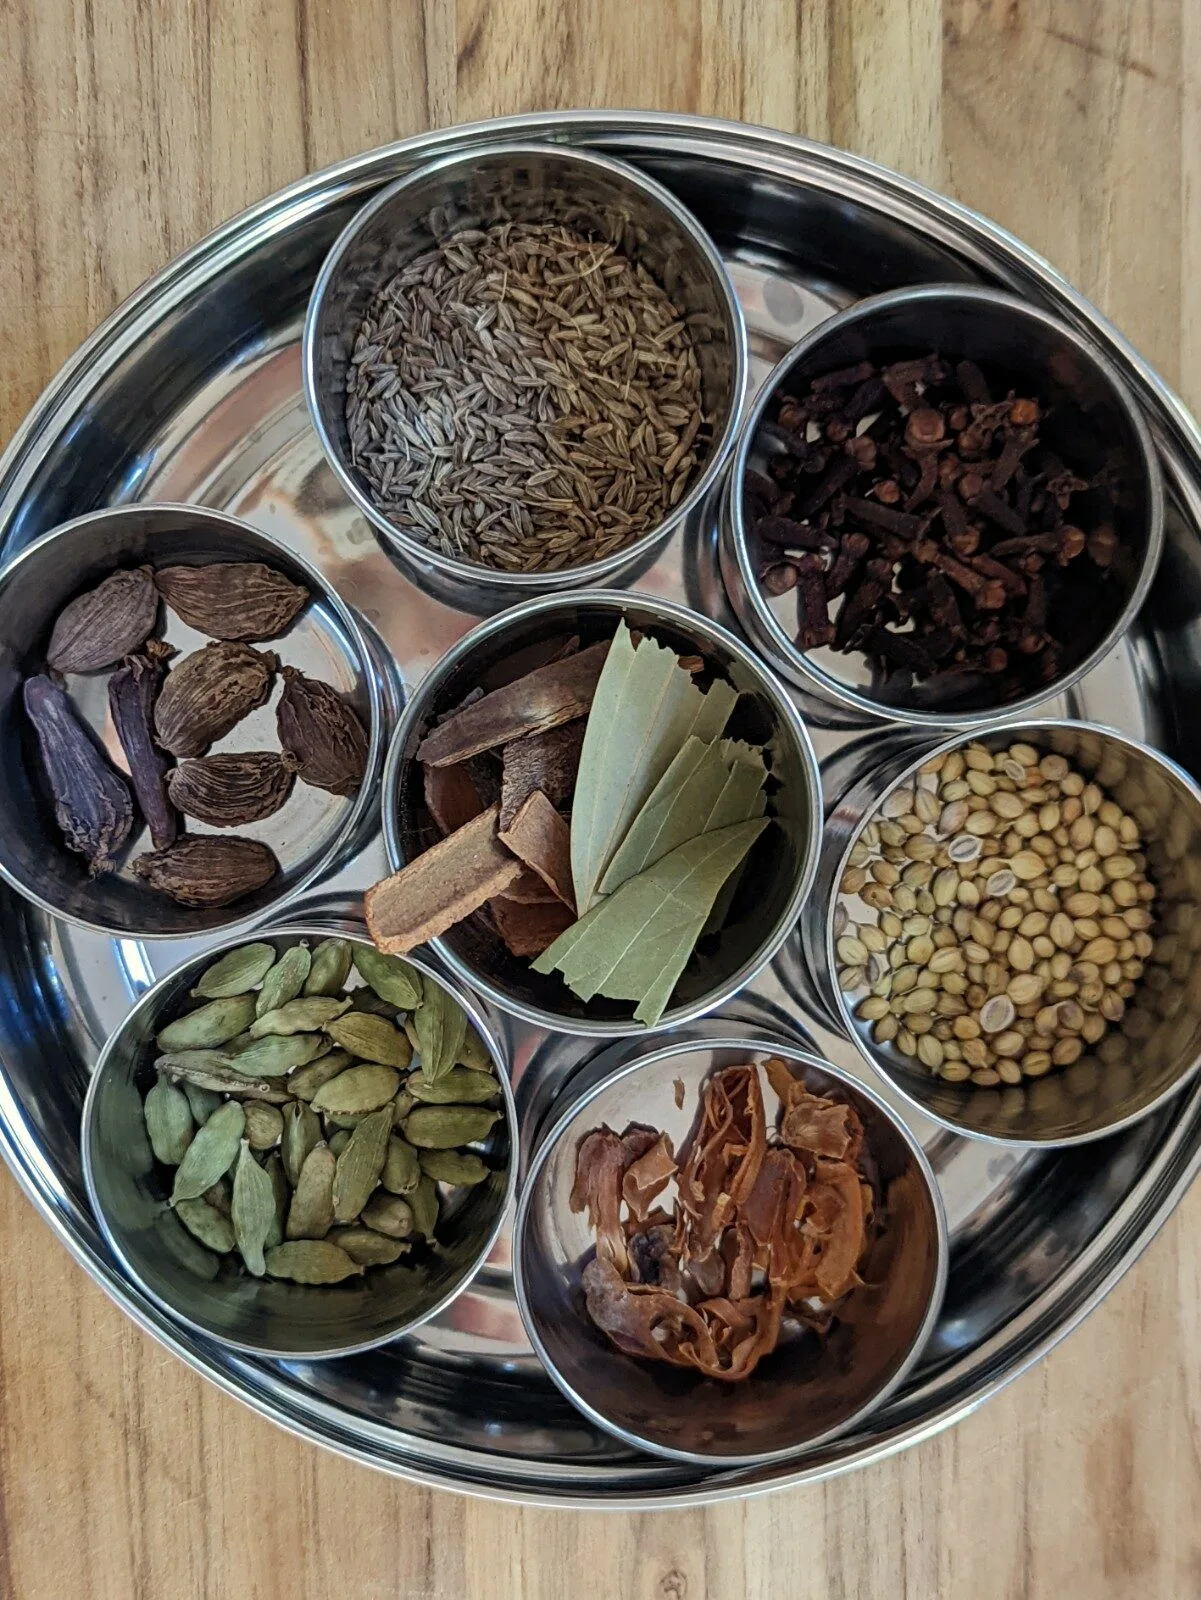 Whole spices for garam masala.